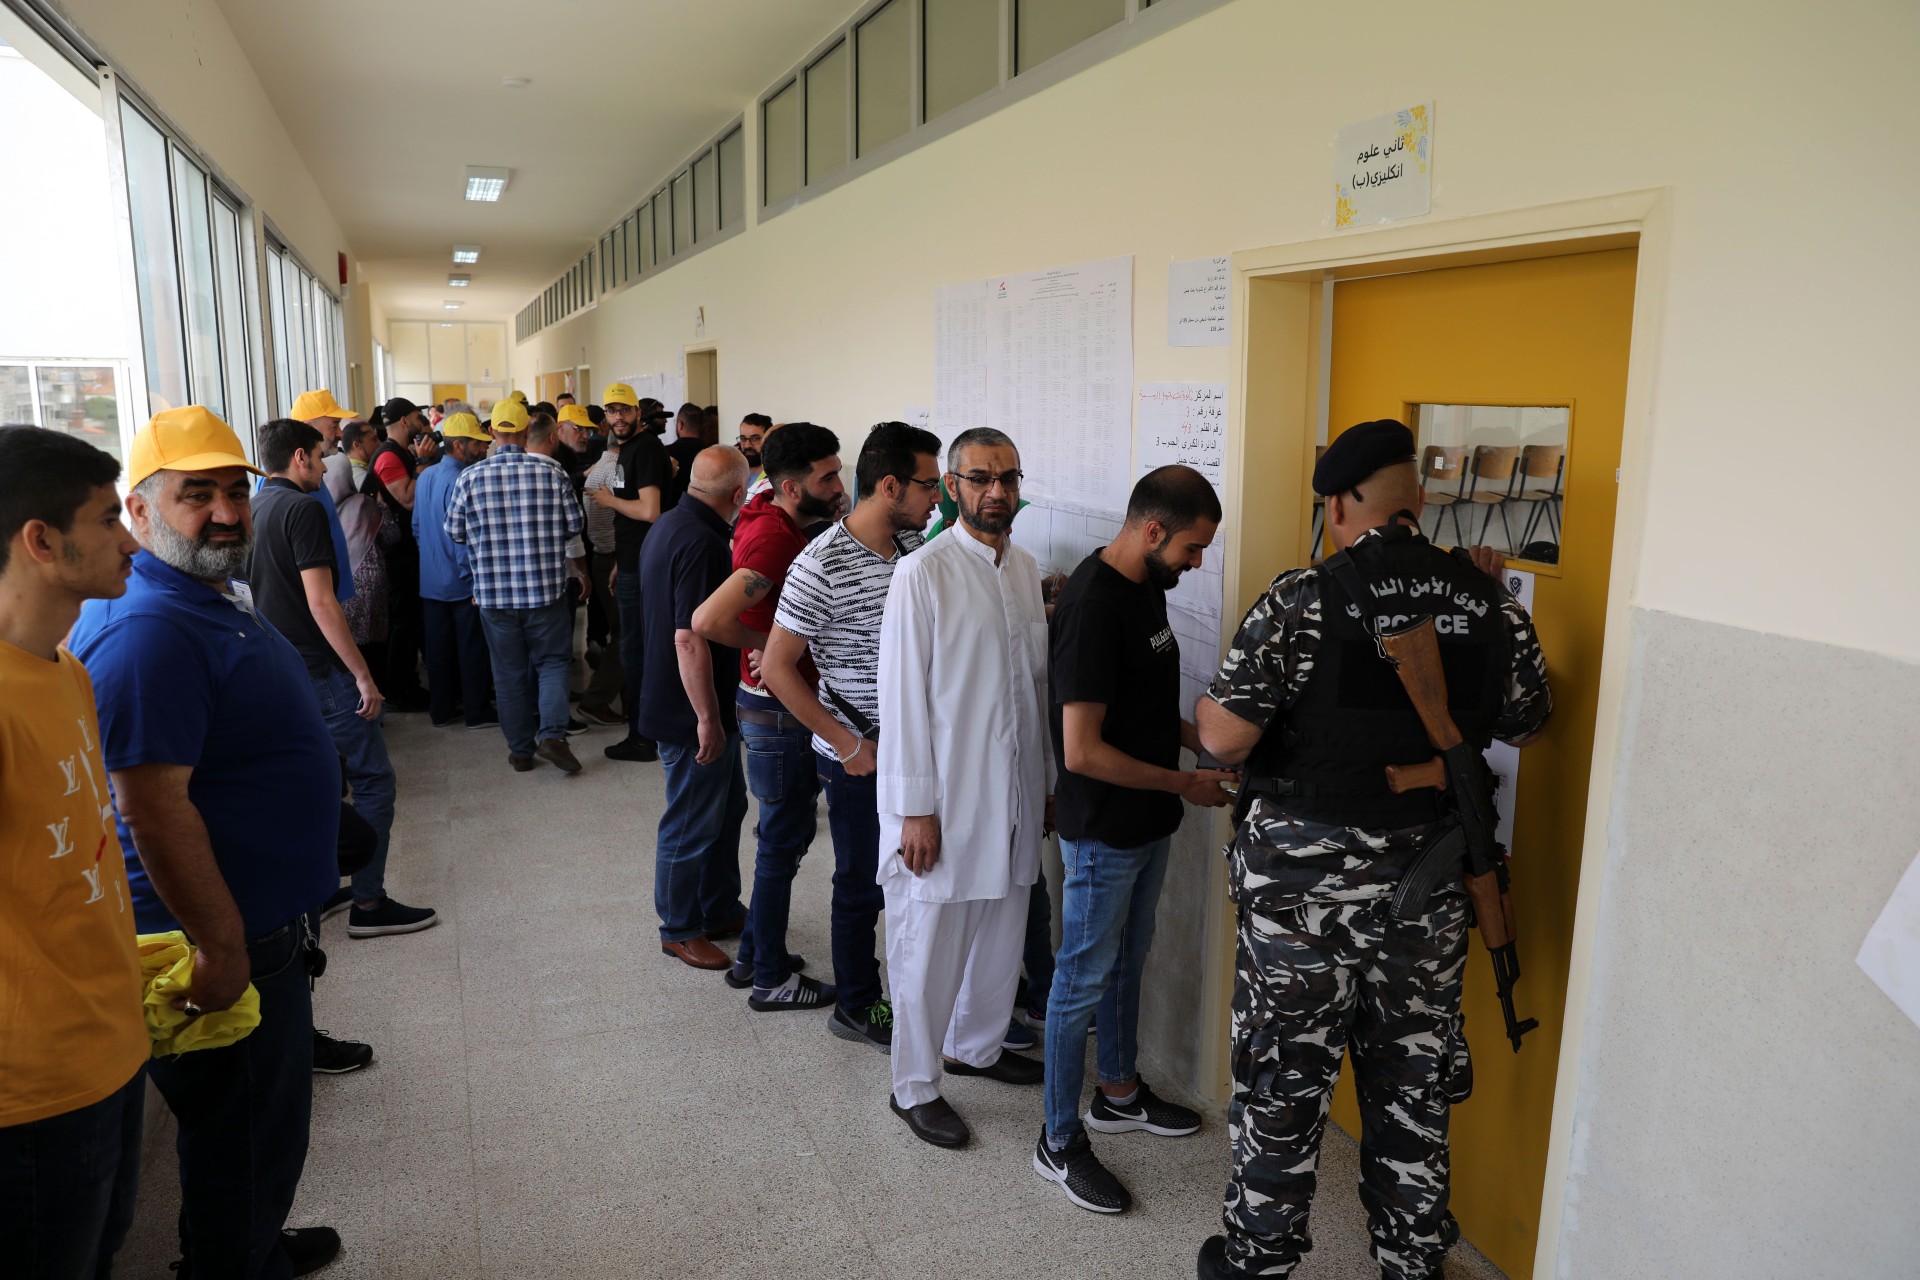 People queue at a polling station in southern Lebanon's Bint Jbeil (MEE/Hassan Shaaban)